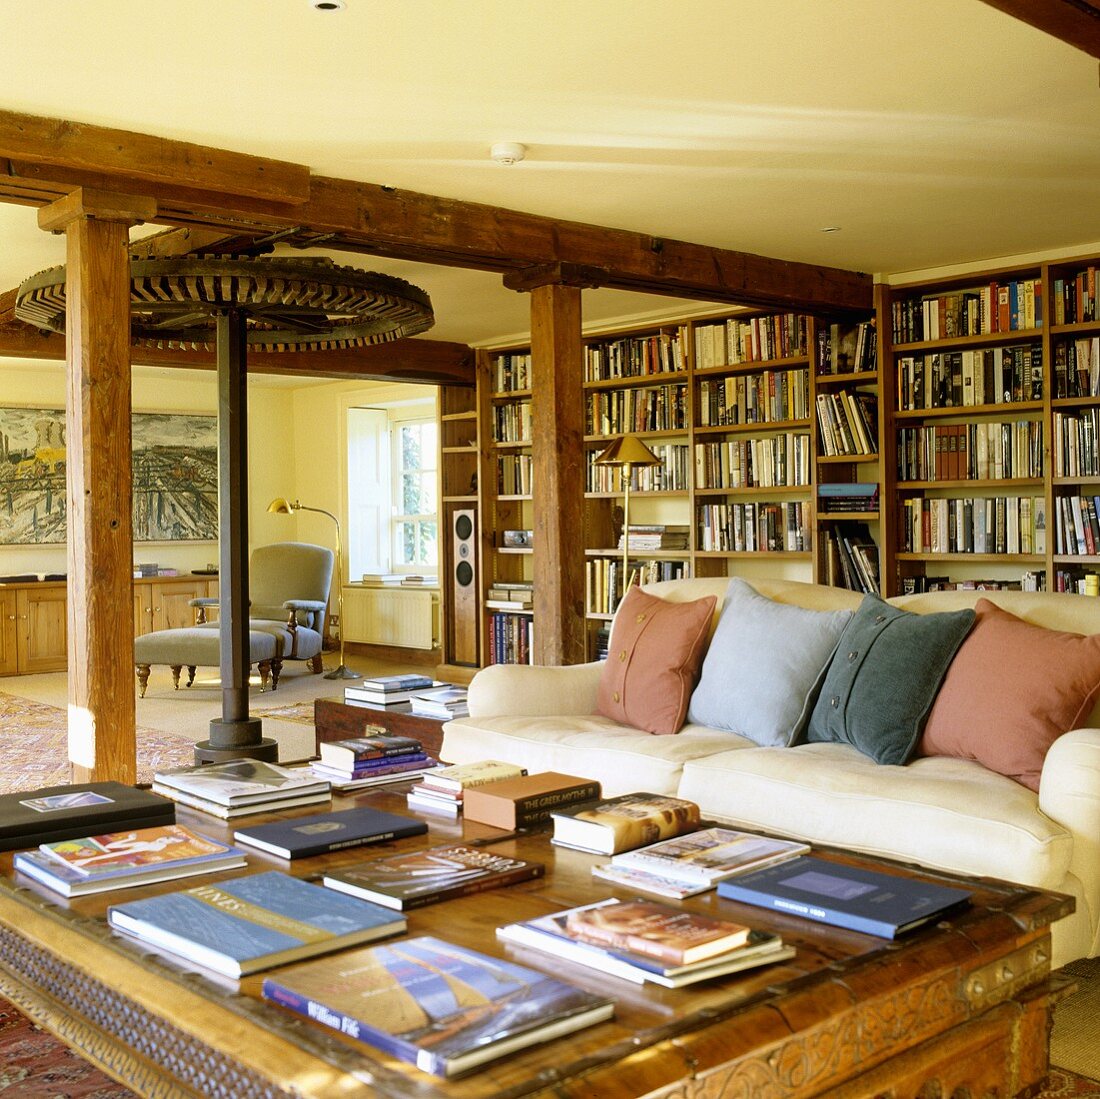 An old English mill house with an open-plan living room and a sofa in front of a long bookshelf